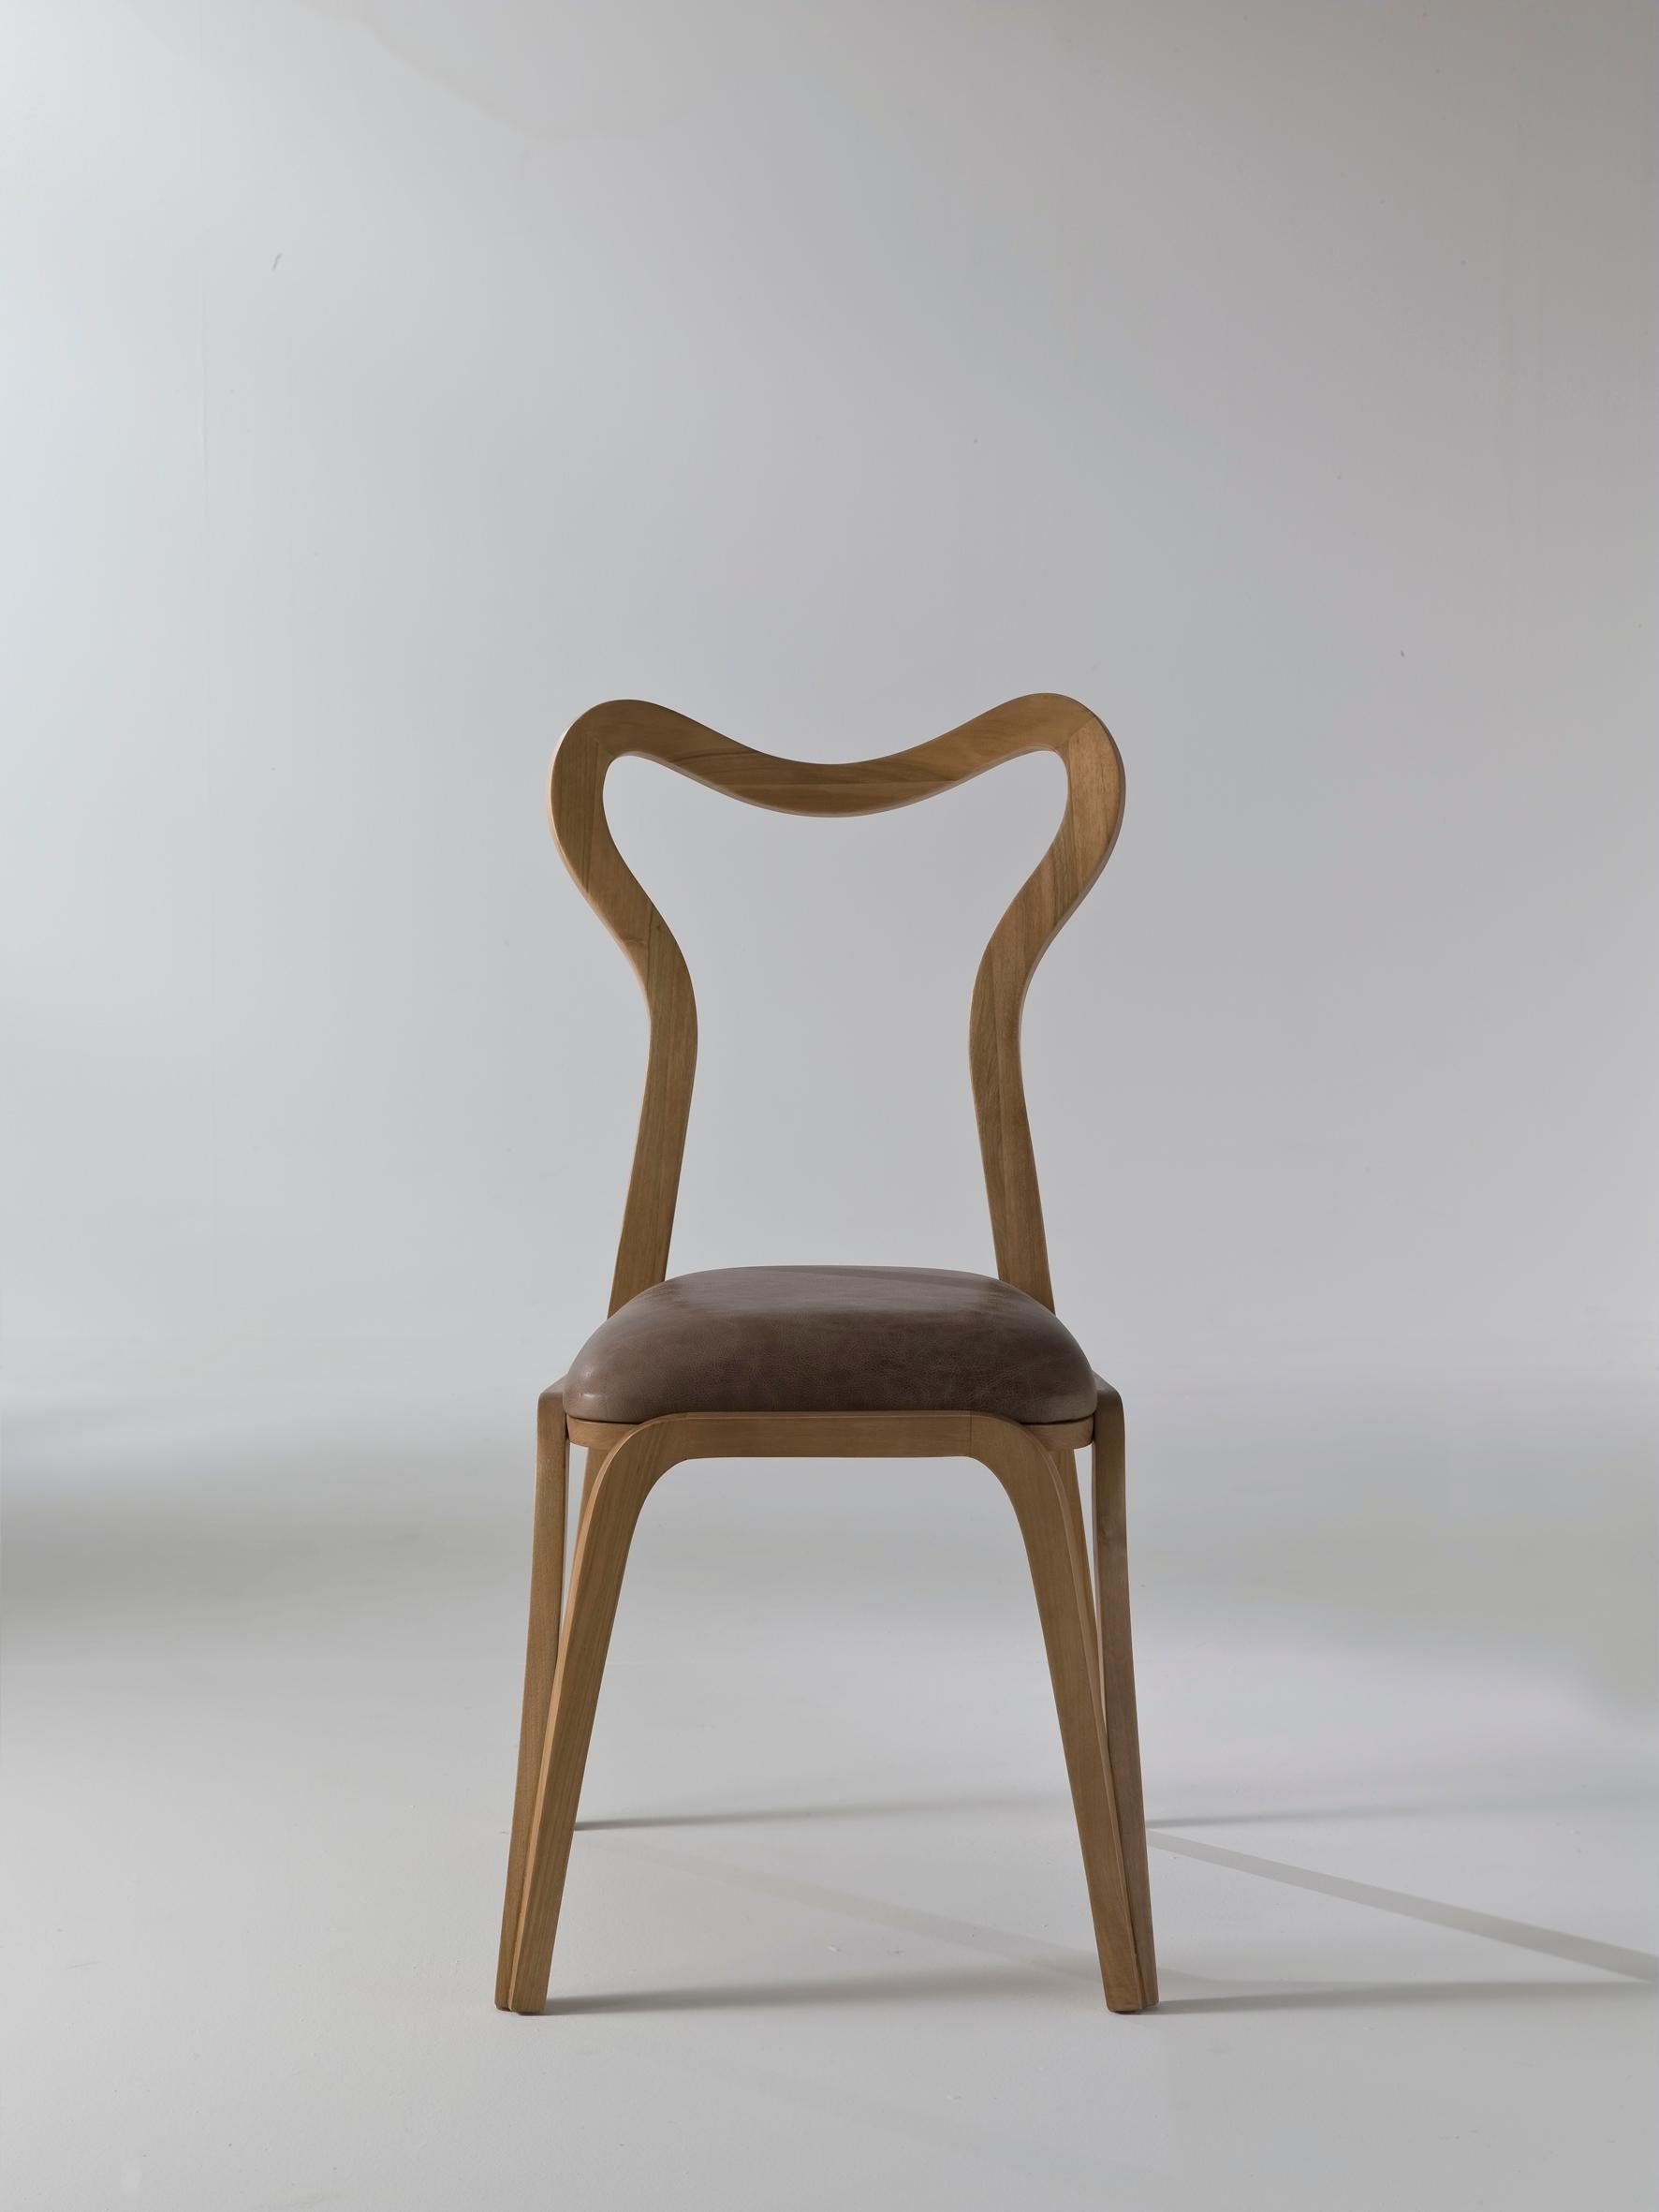 Introducing the Daina Chair—a masterpiece of Italian craftsmanship designed by Nigel Coates, where inspiration from the fallow deer's flexibility and the grace of the female body converges to create a chair that exudes elegance and